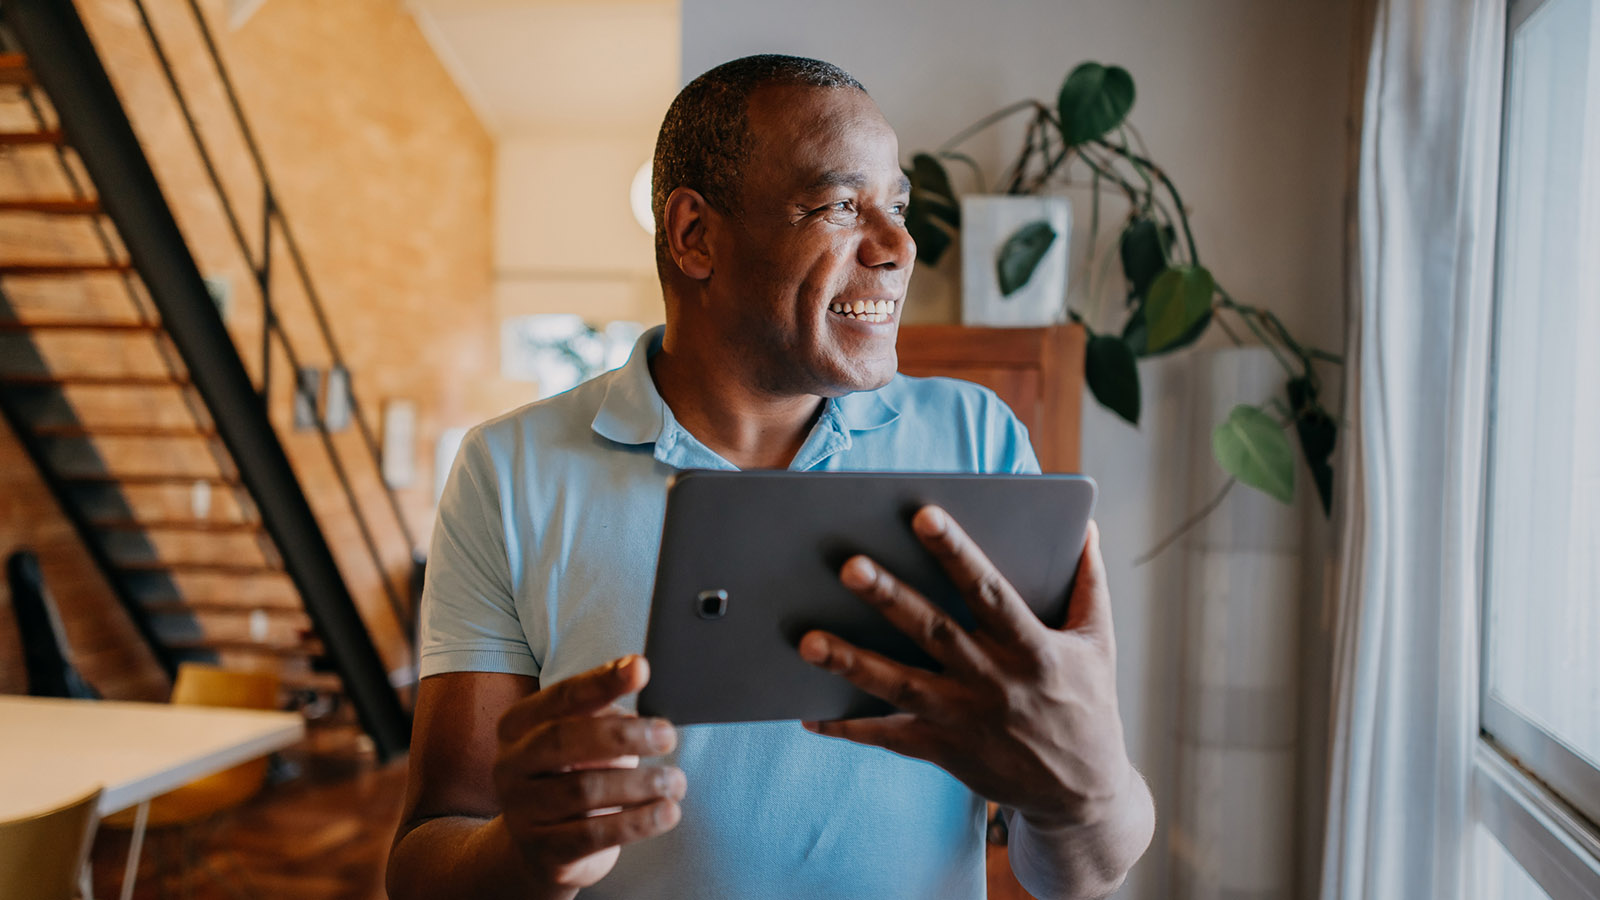 Middle aged man holding up a tablet and smiling while looking out the window